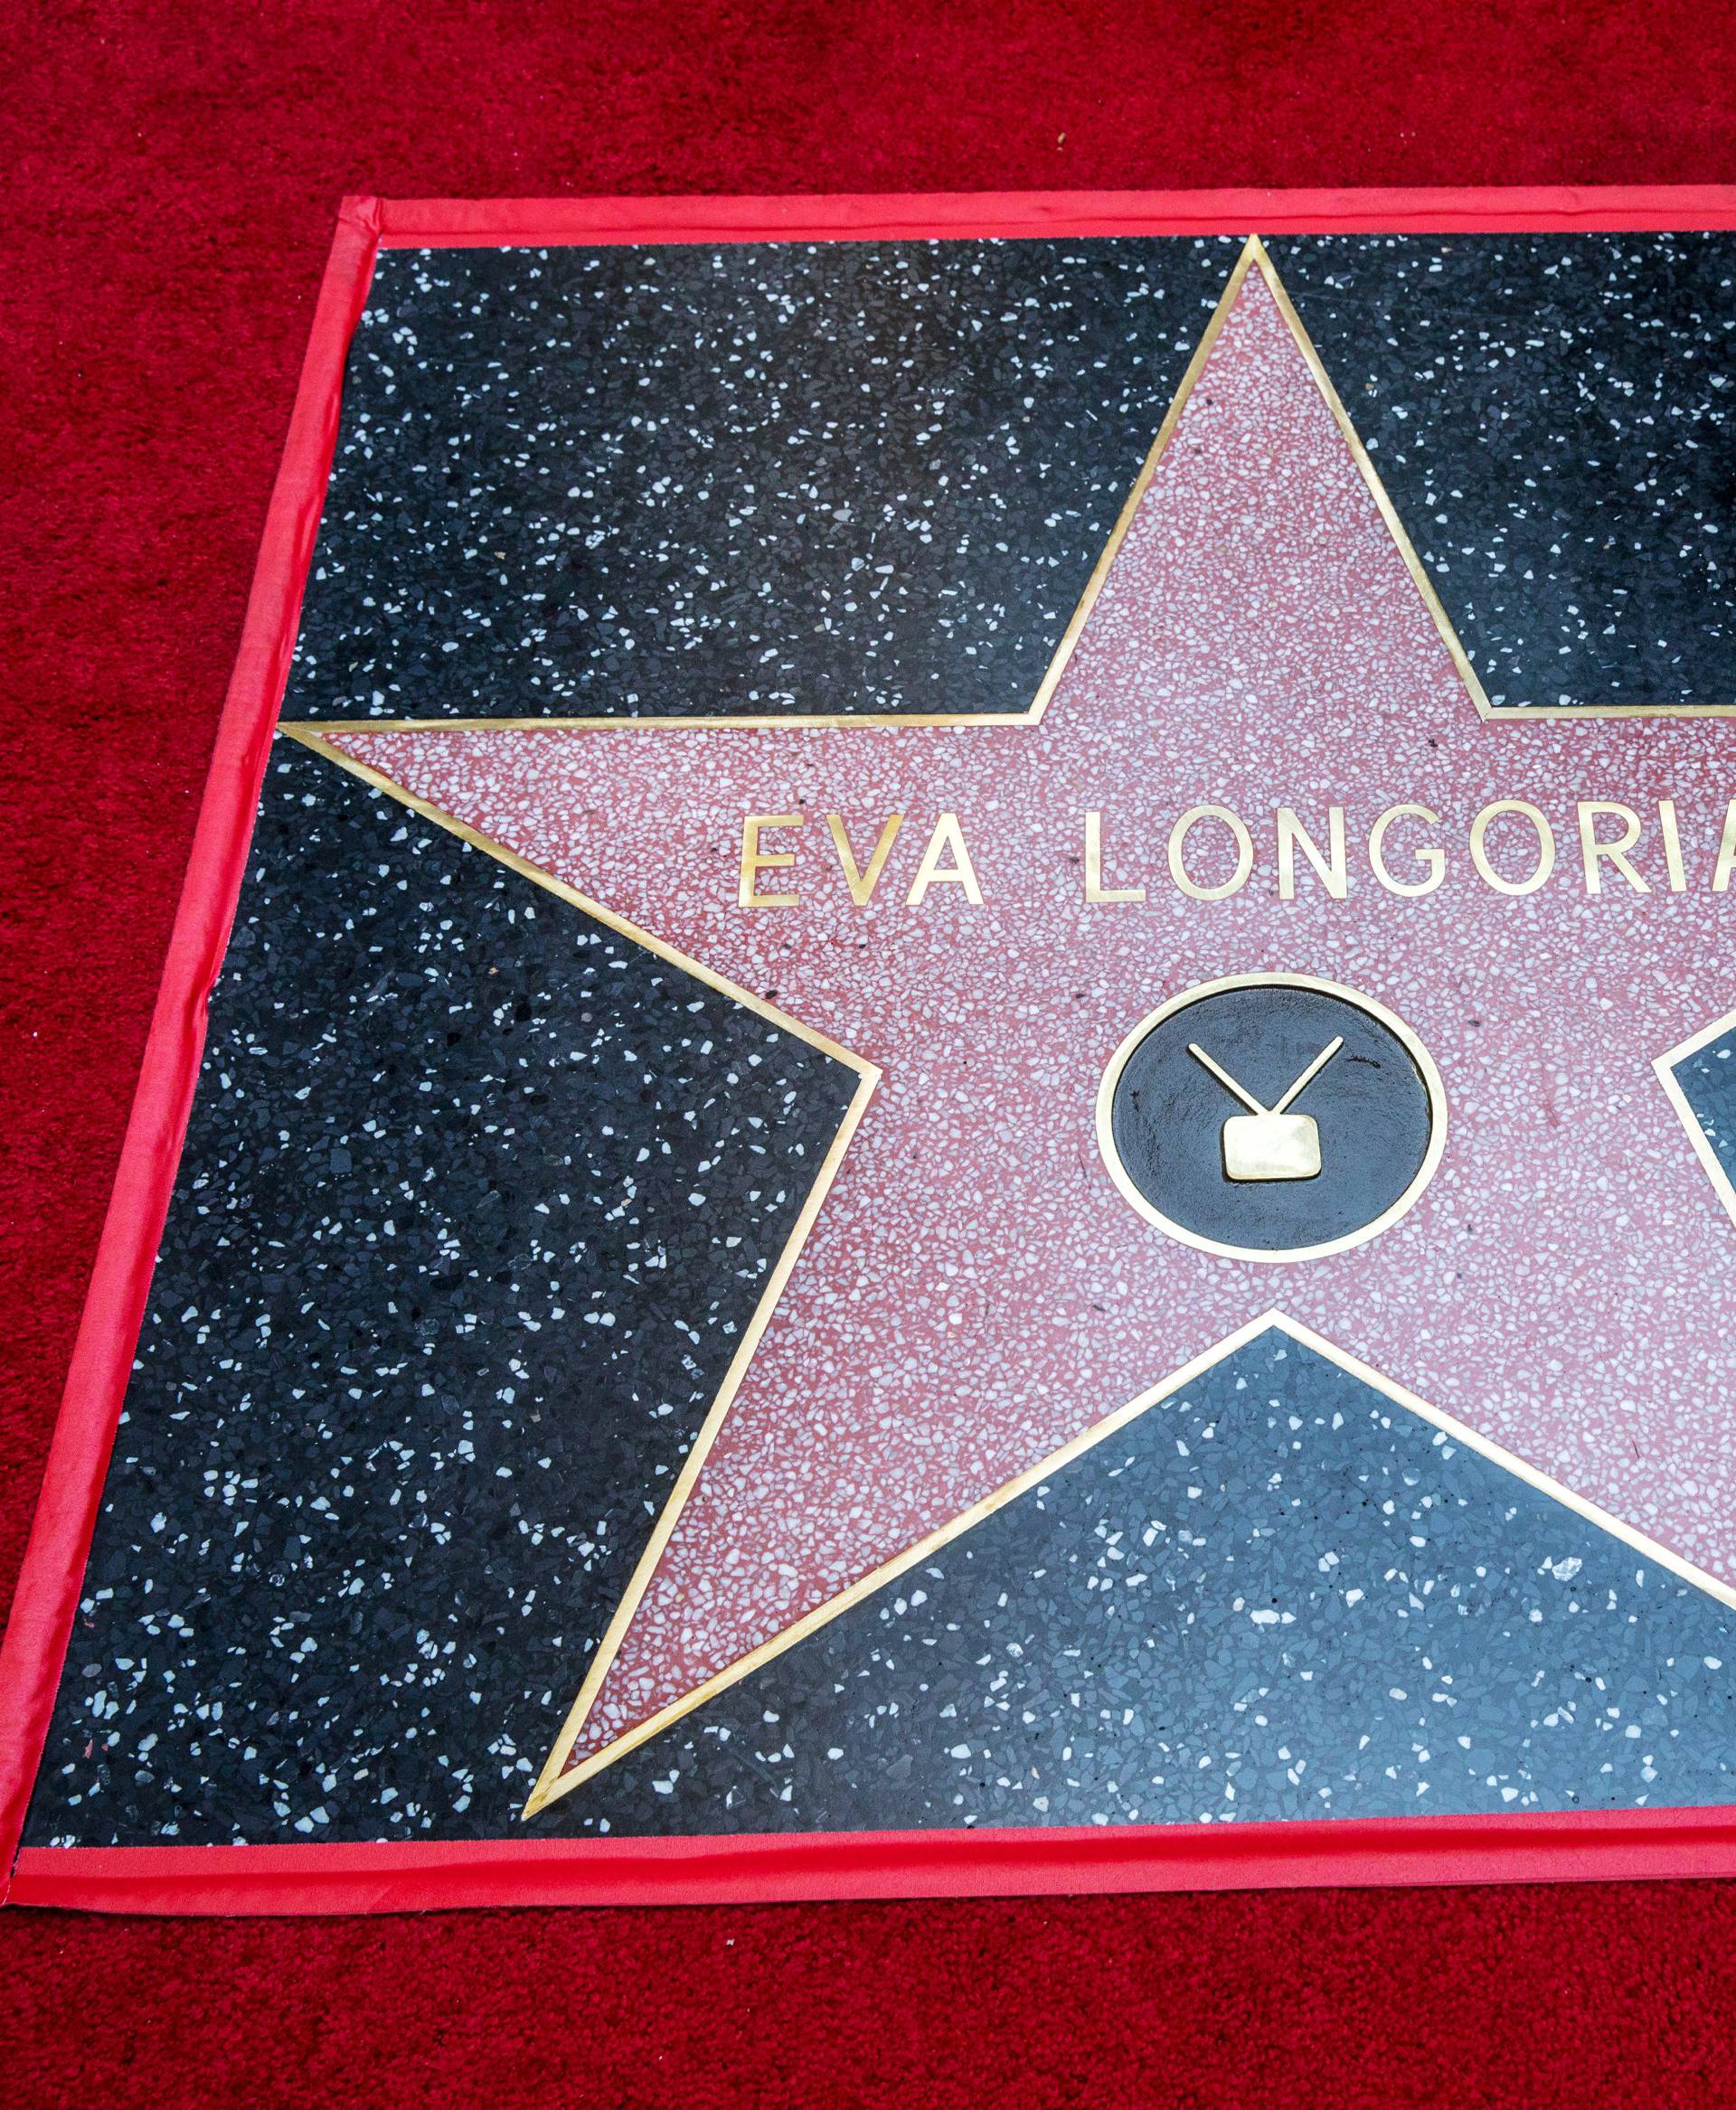 Eva Longoria's star is seen on the Hollywood Walk of Fame in Los Angeles